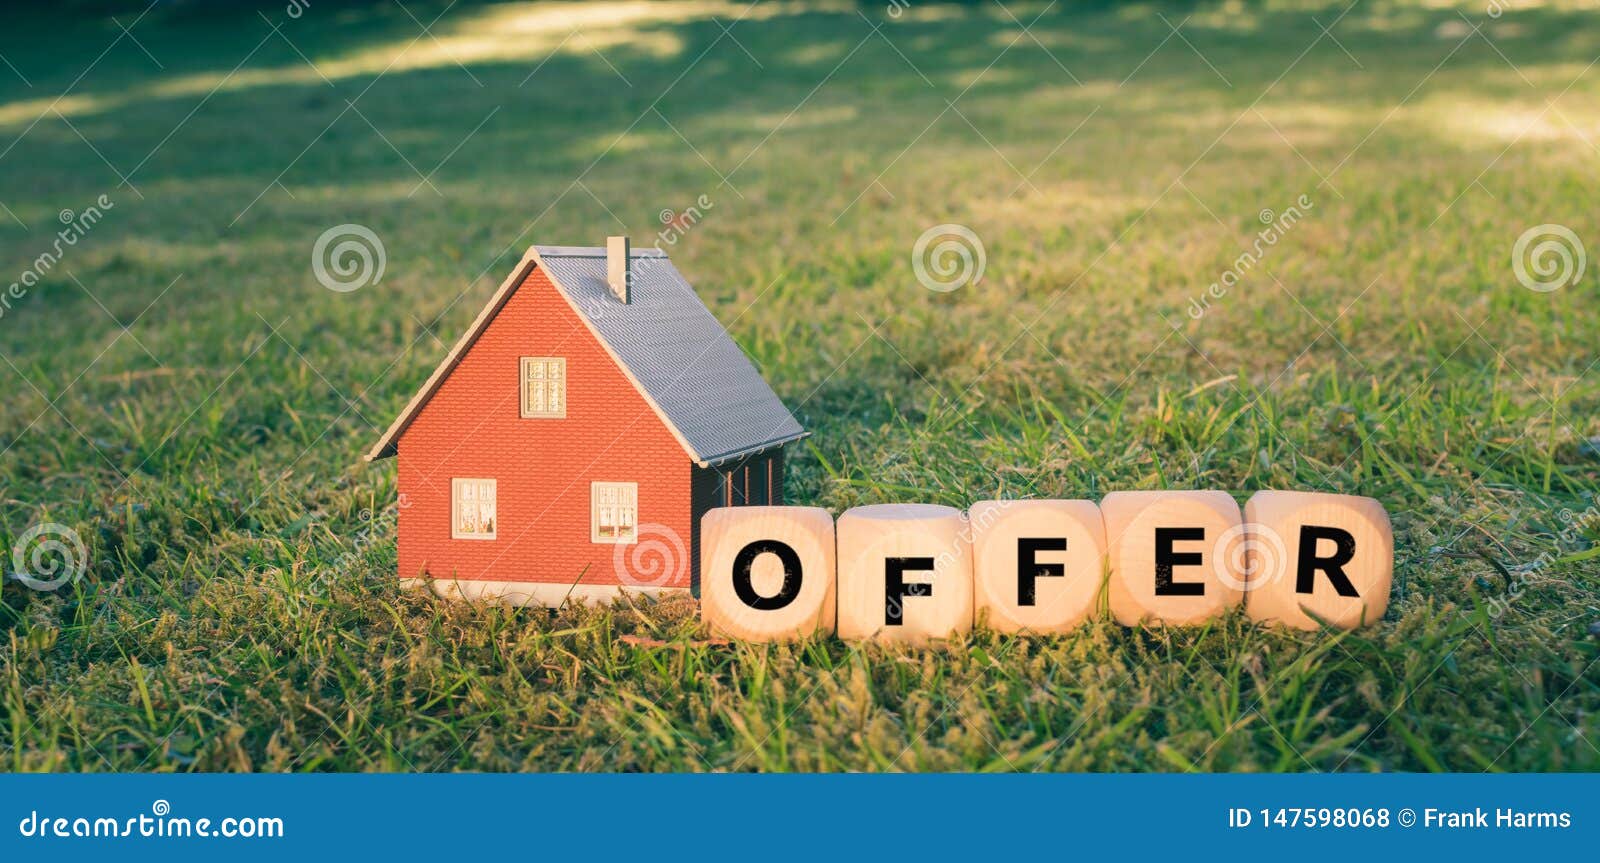 concept of making an offer on a house.